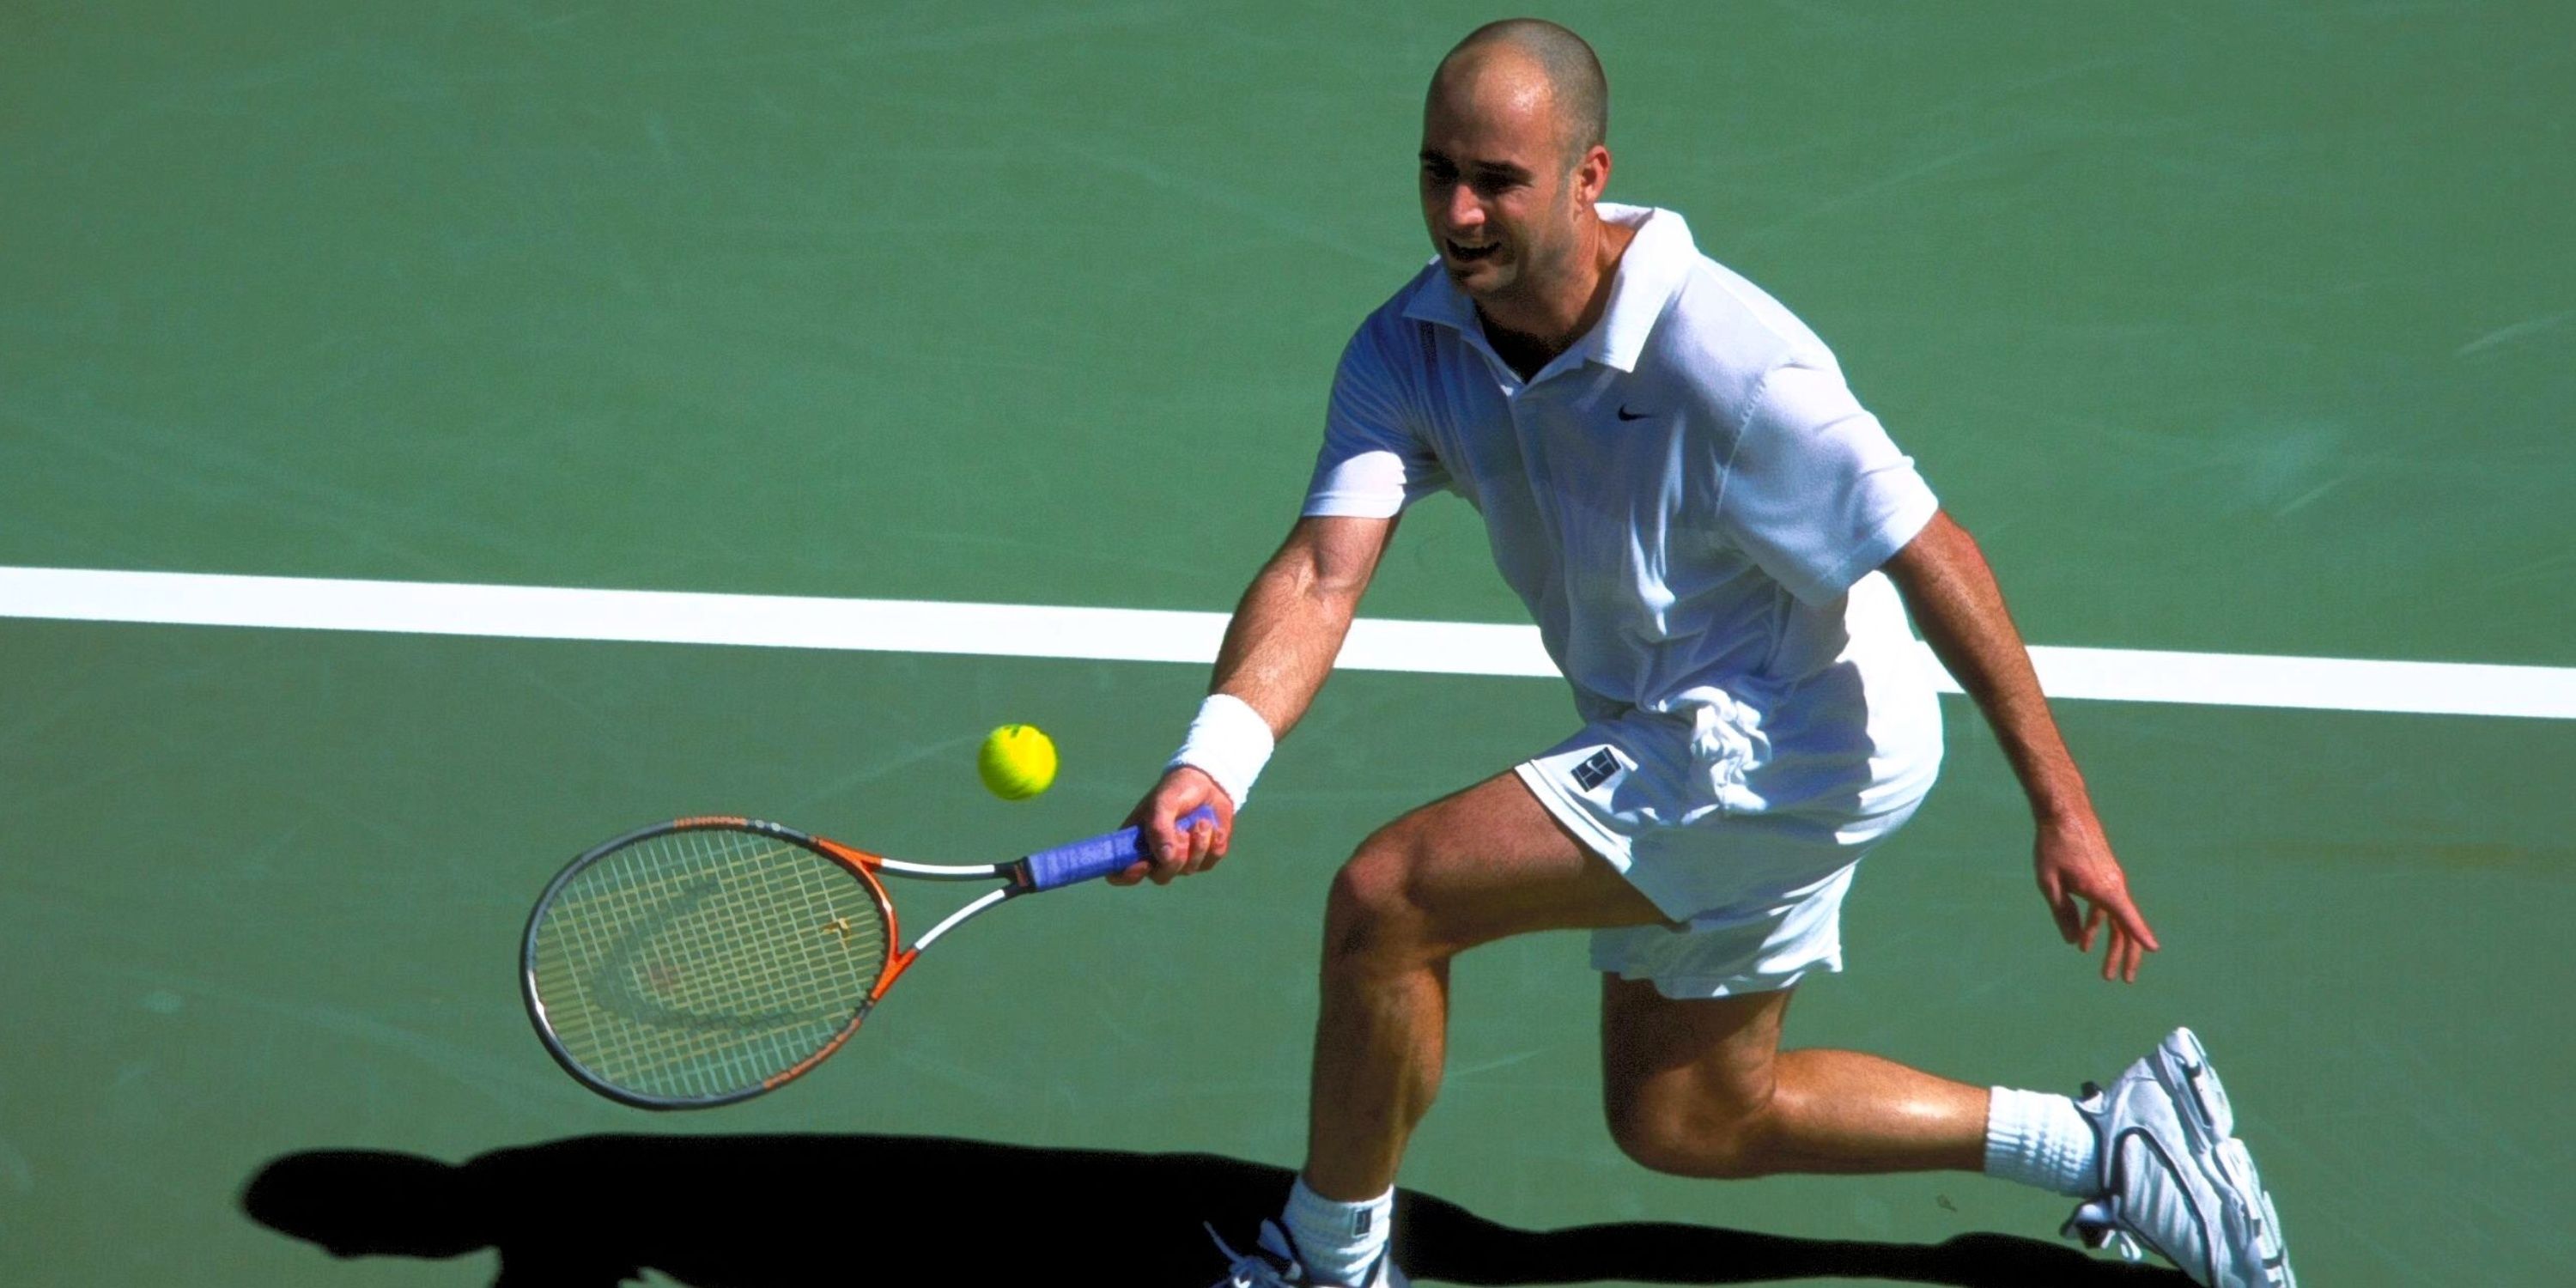 Andre Agassi in action.